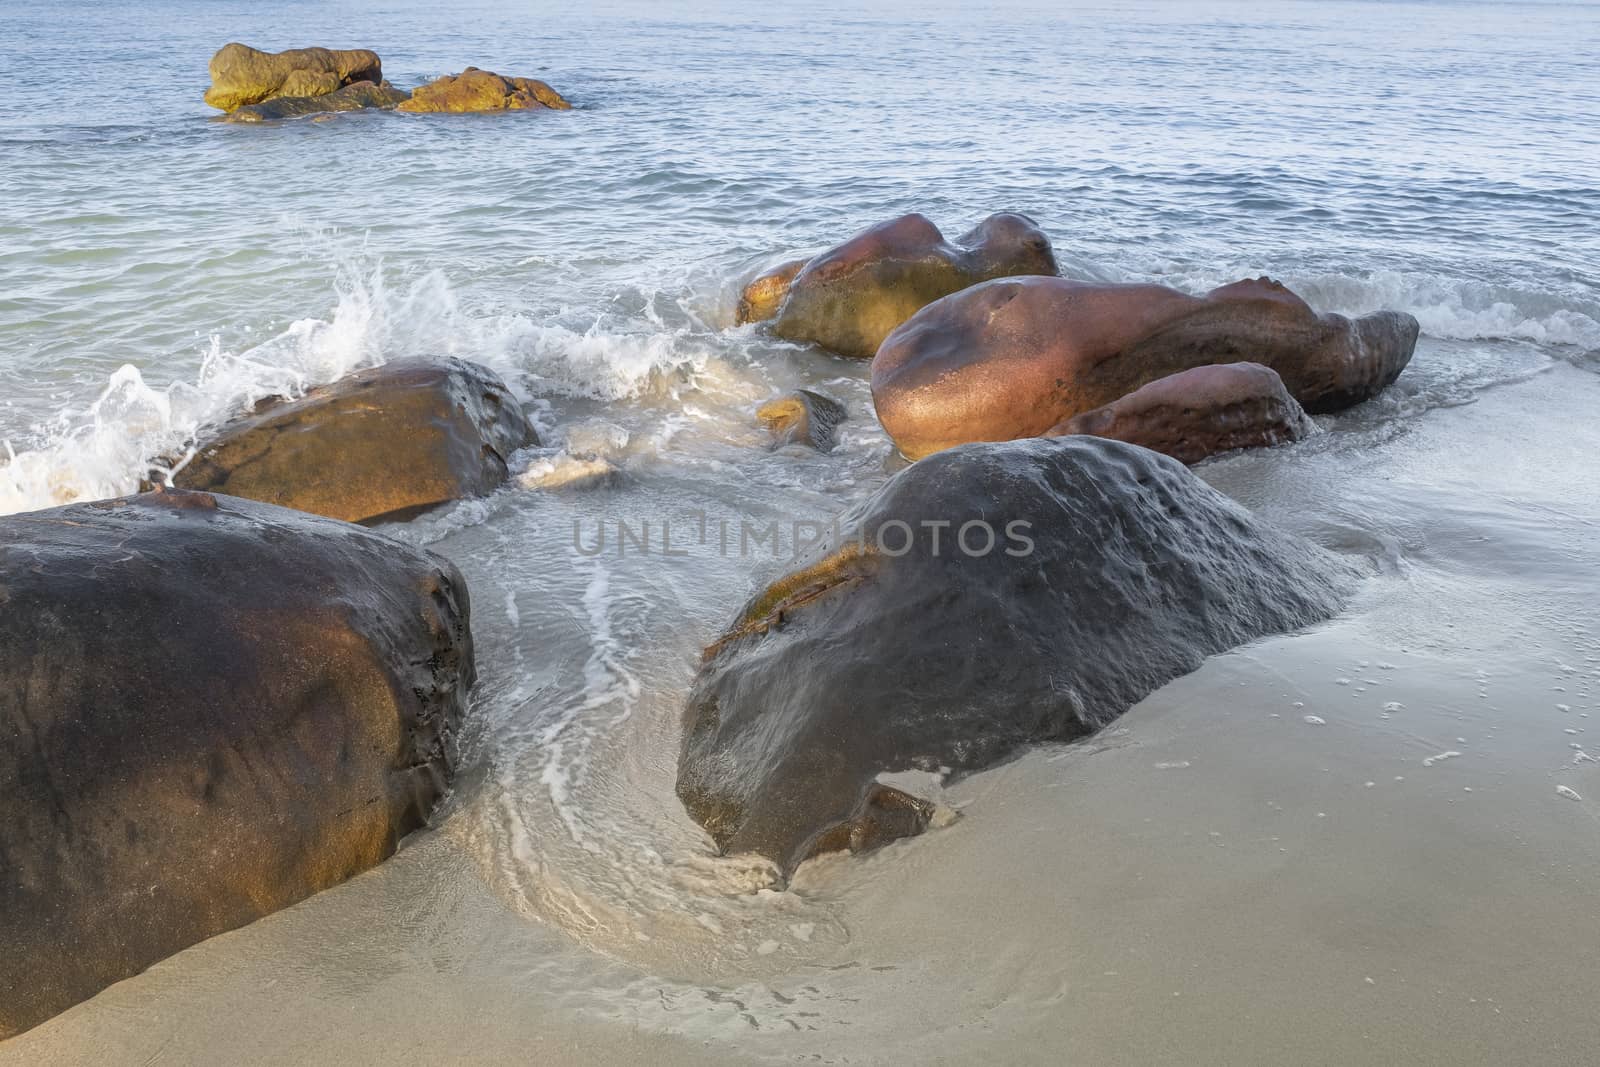 White waves splashing on the rocks at the sandy beach of the Gulf of Thailand.